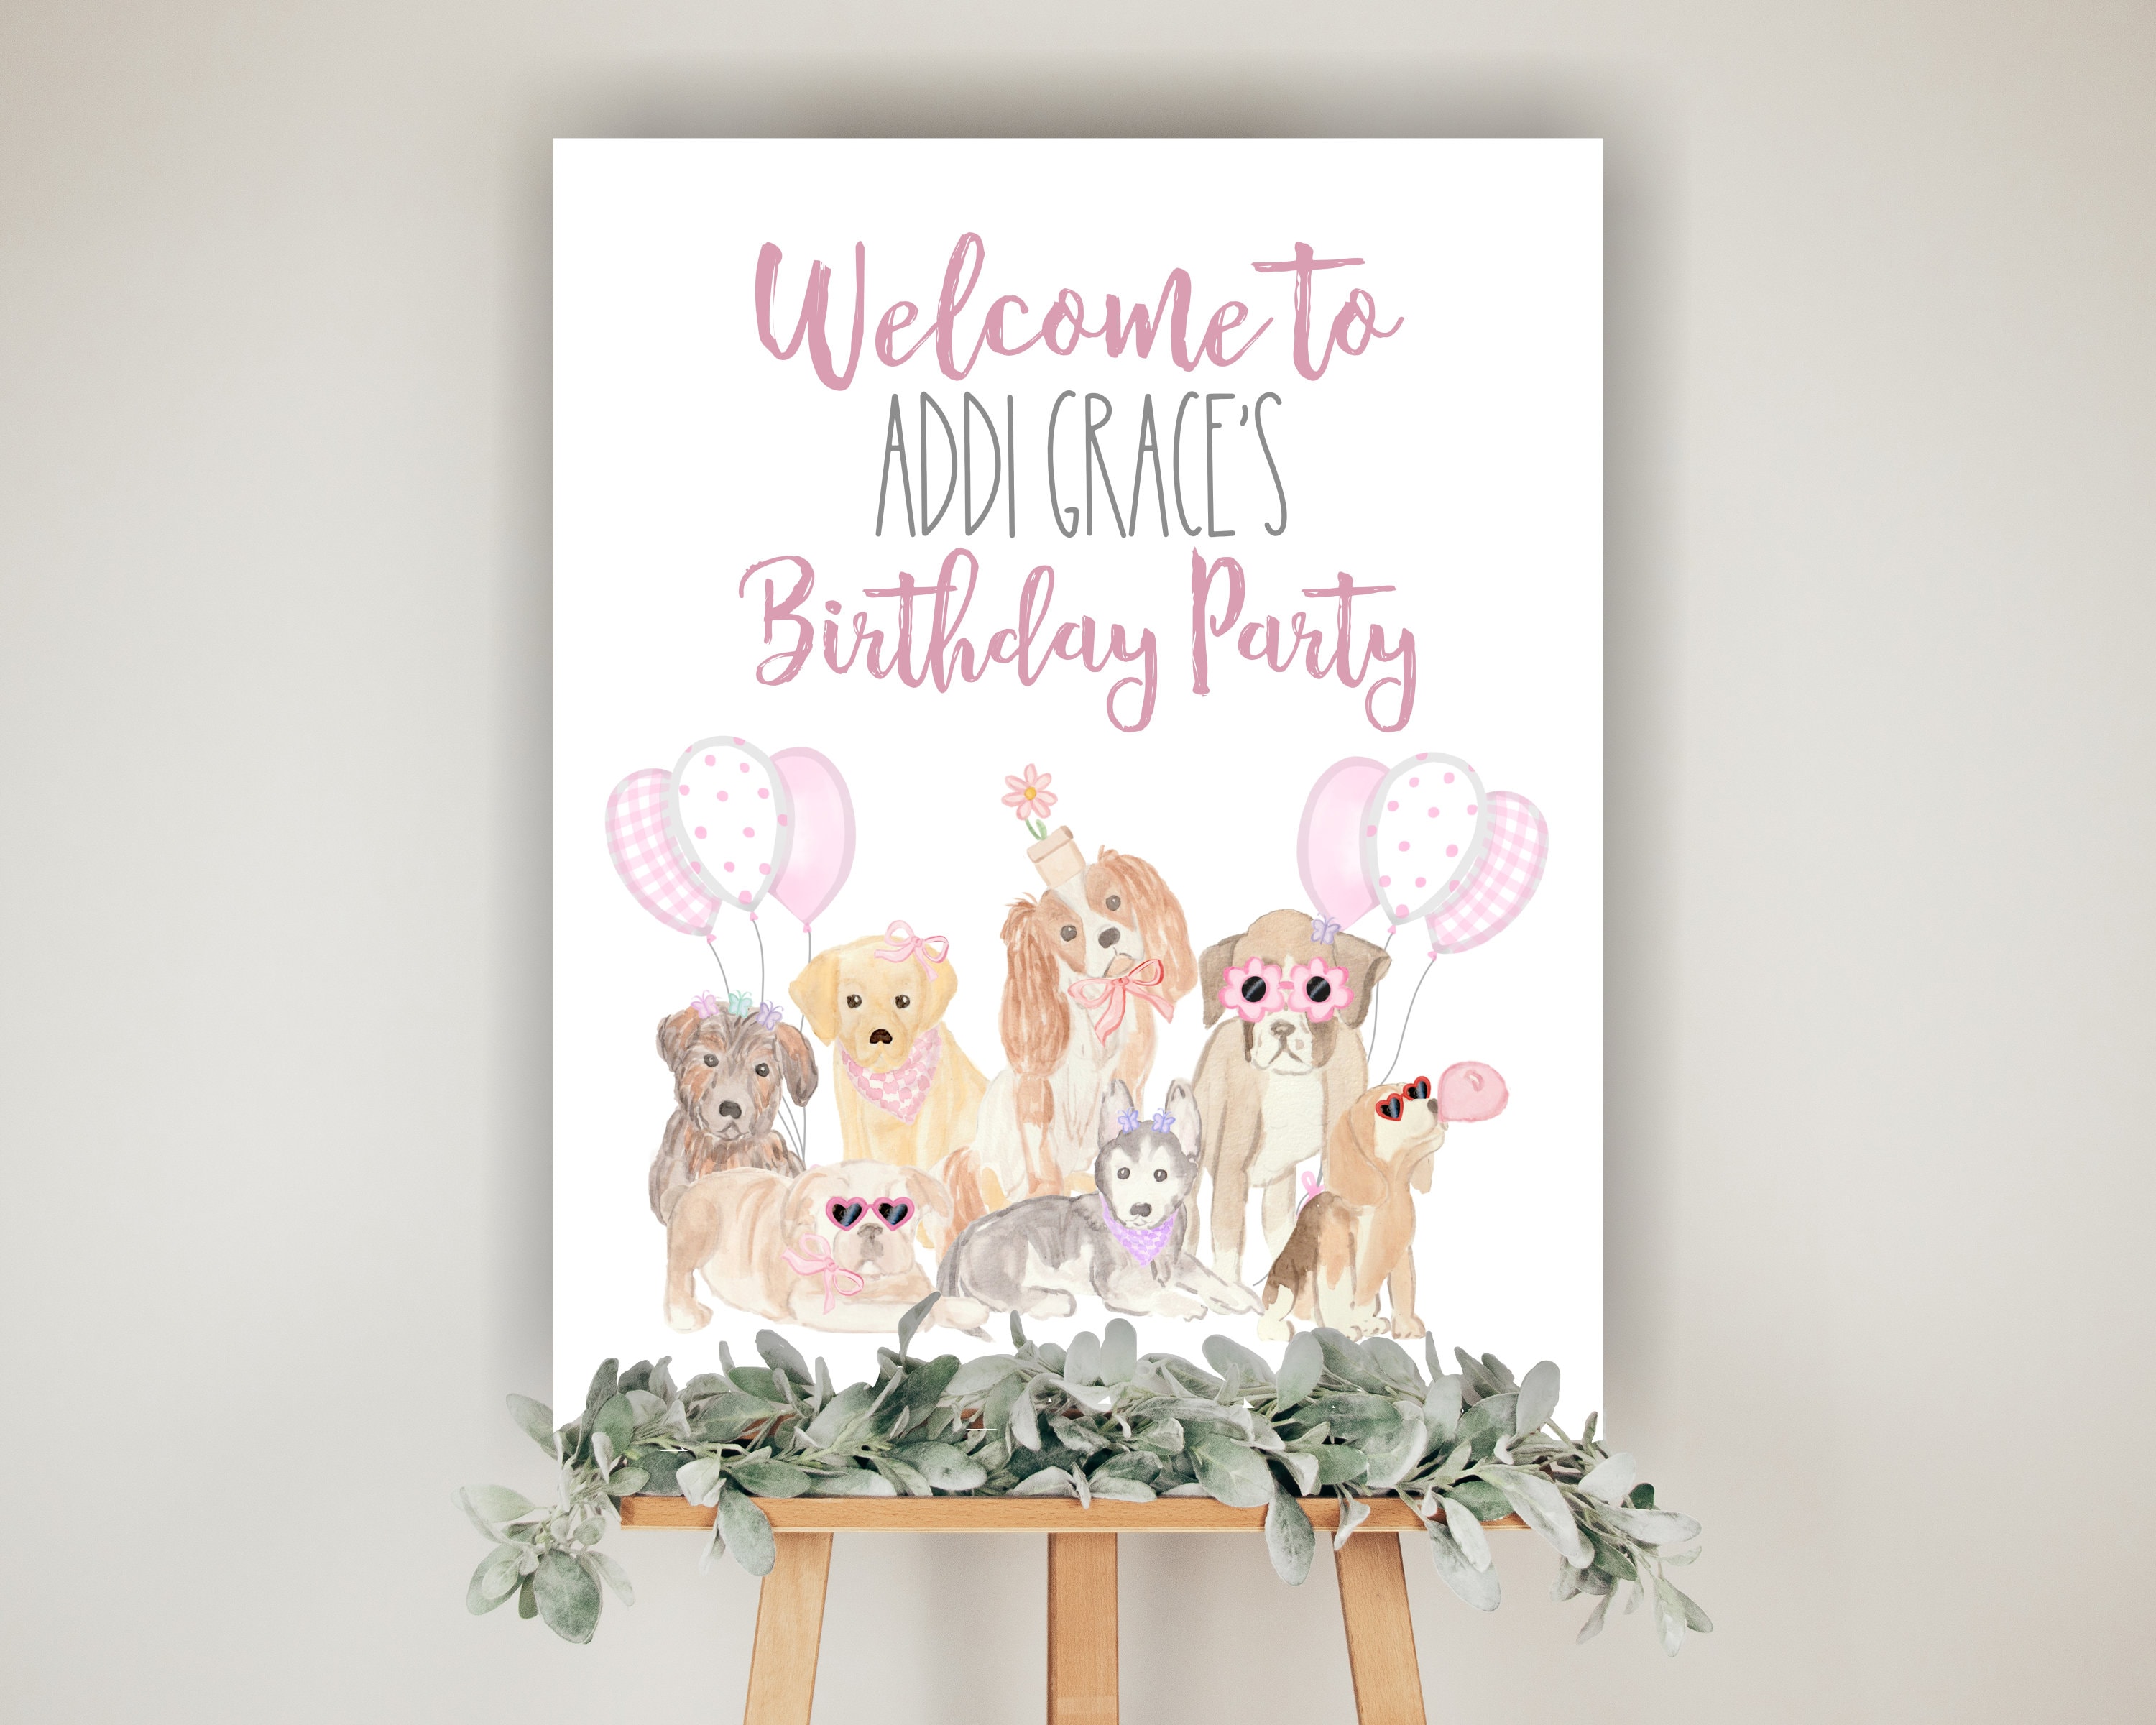 Puppy Dog Welcome Sign - Pretty Plain Paper